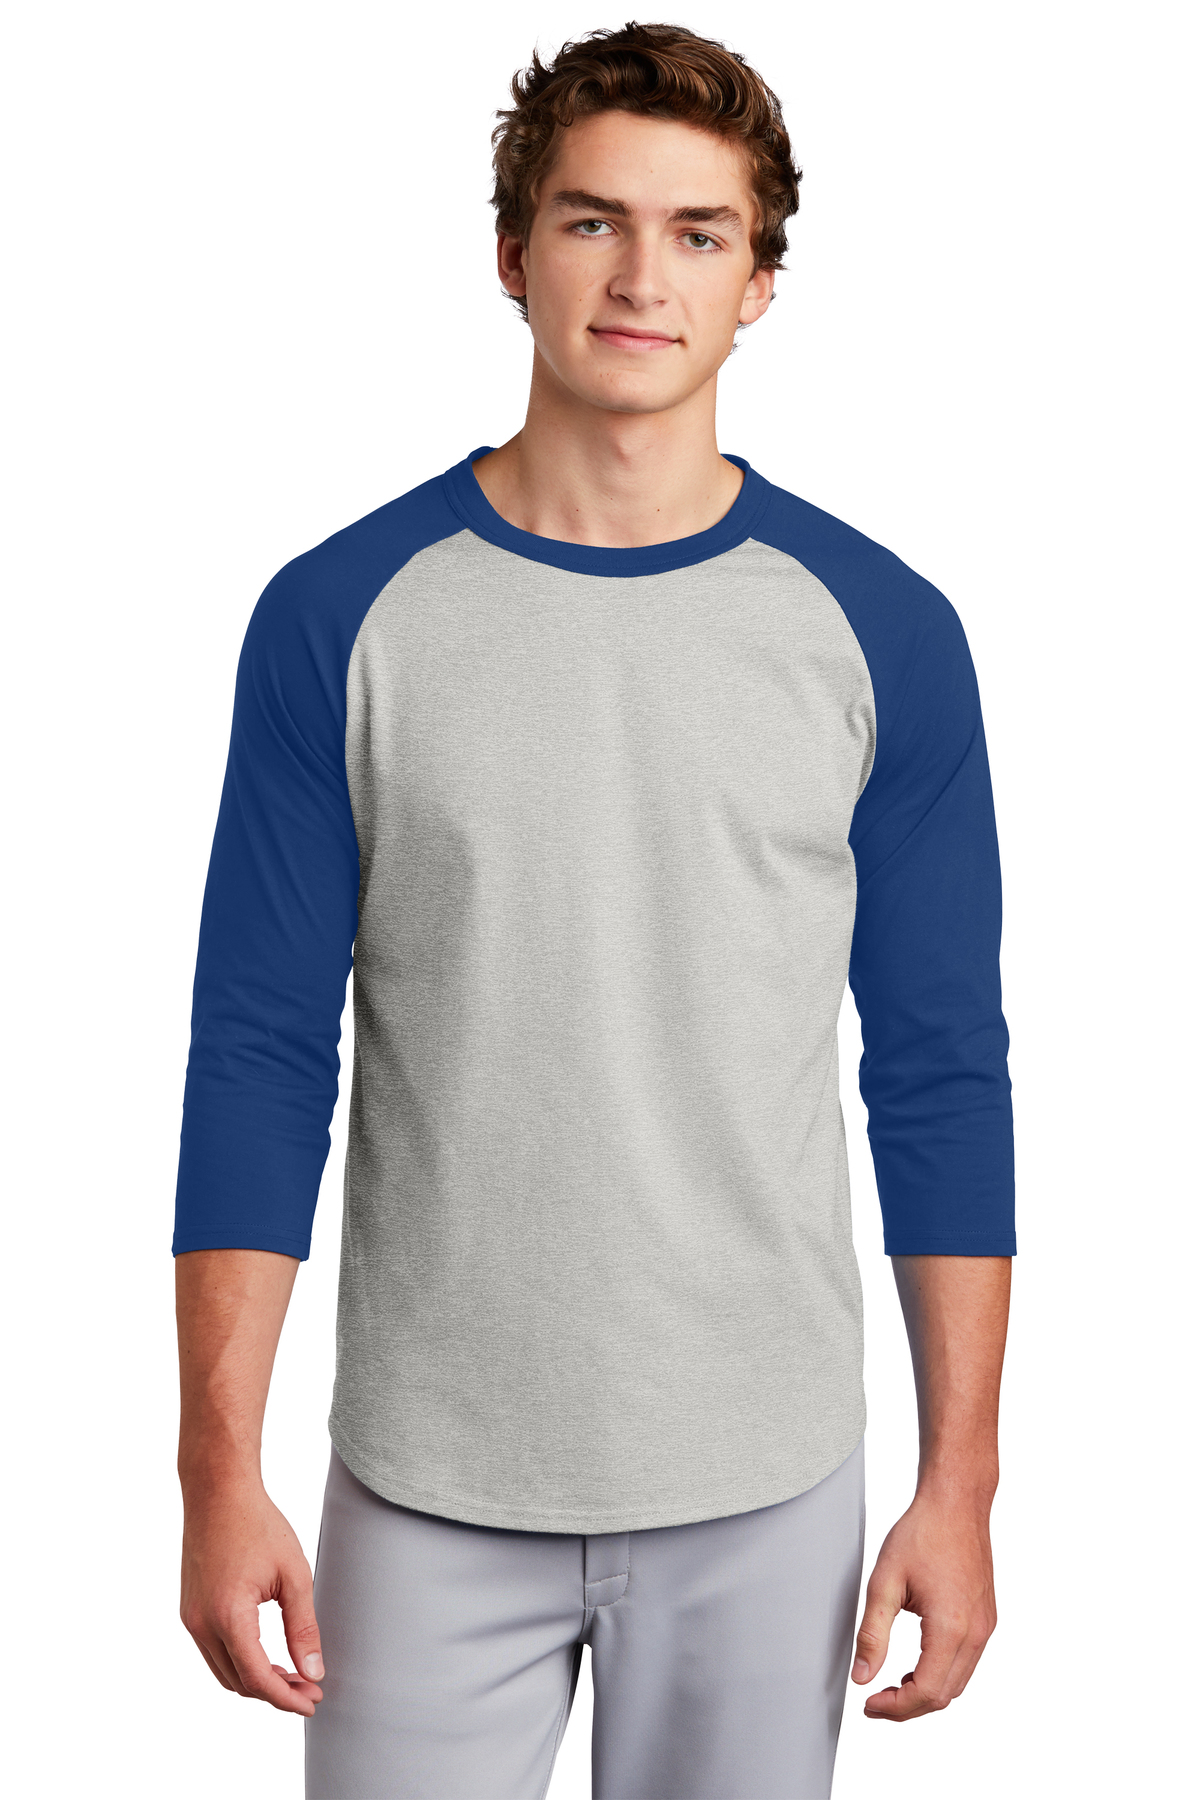 click to view Heather Grey/ Royal